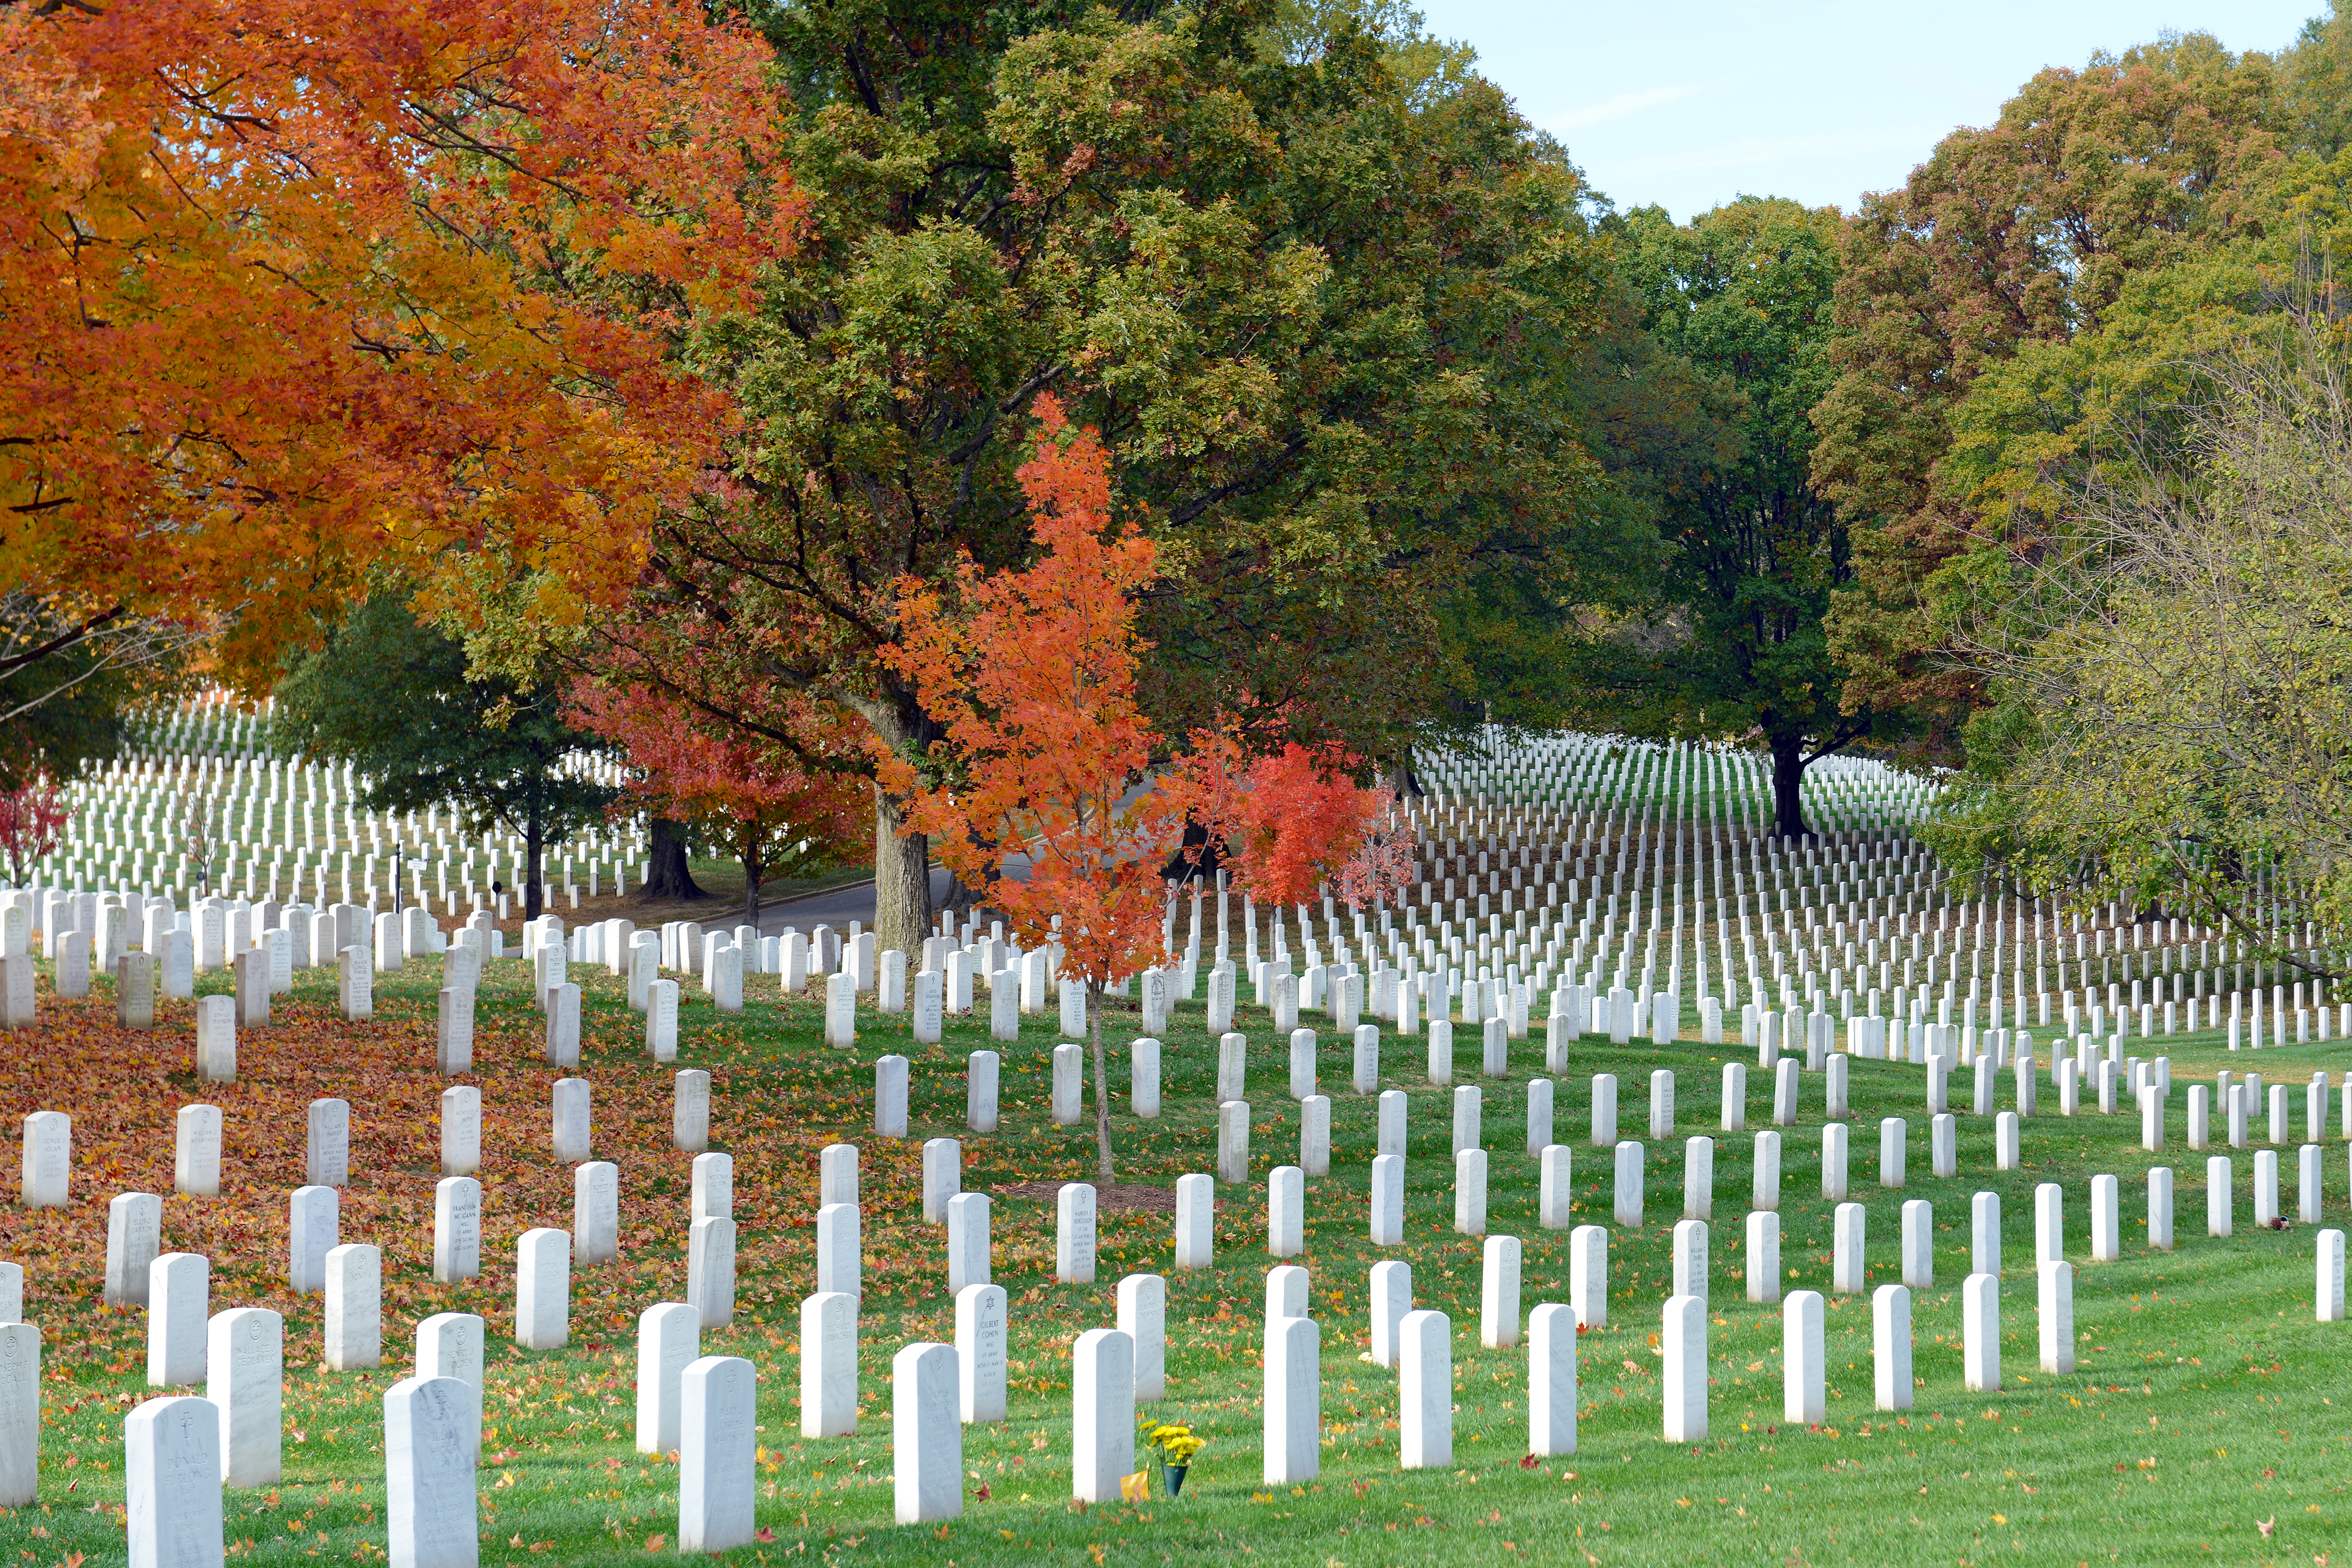 Headstones in Arlington National Cemetery in Washington D.C. (Getty Images)